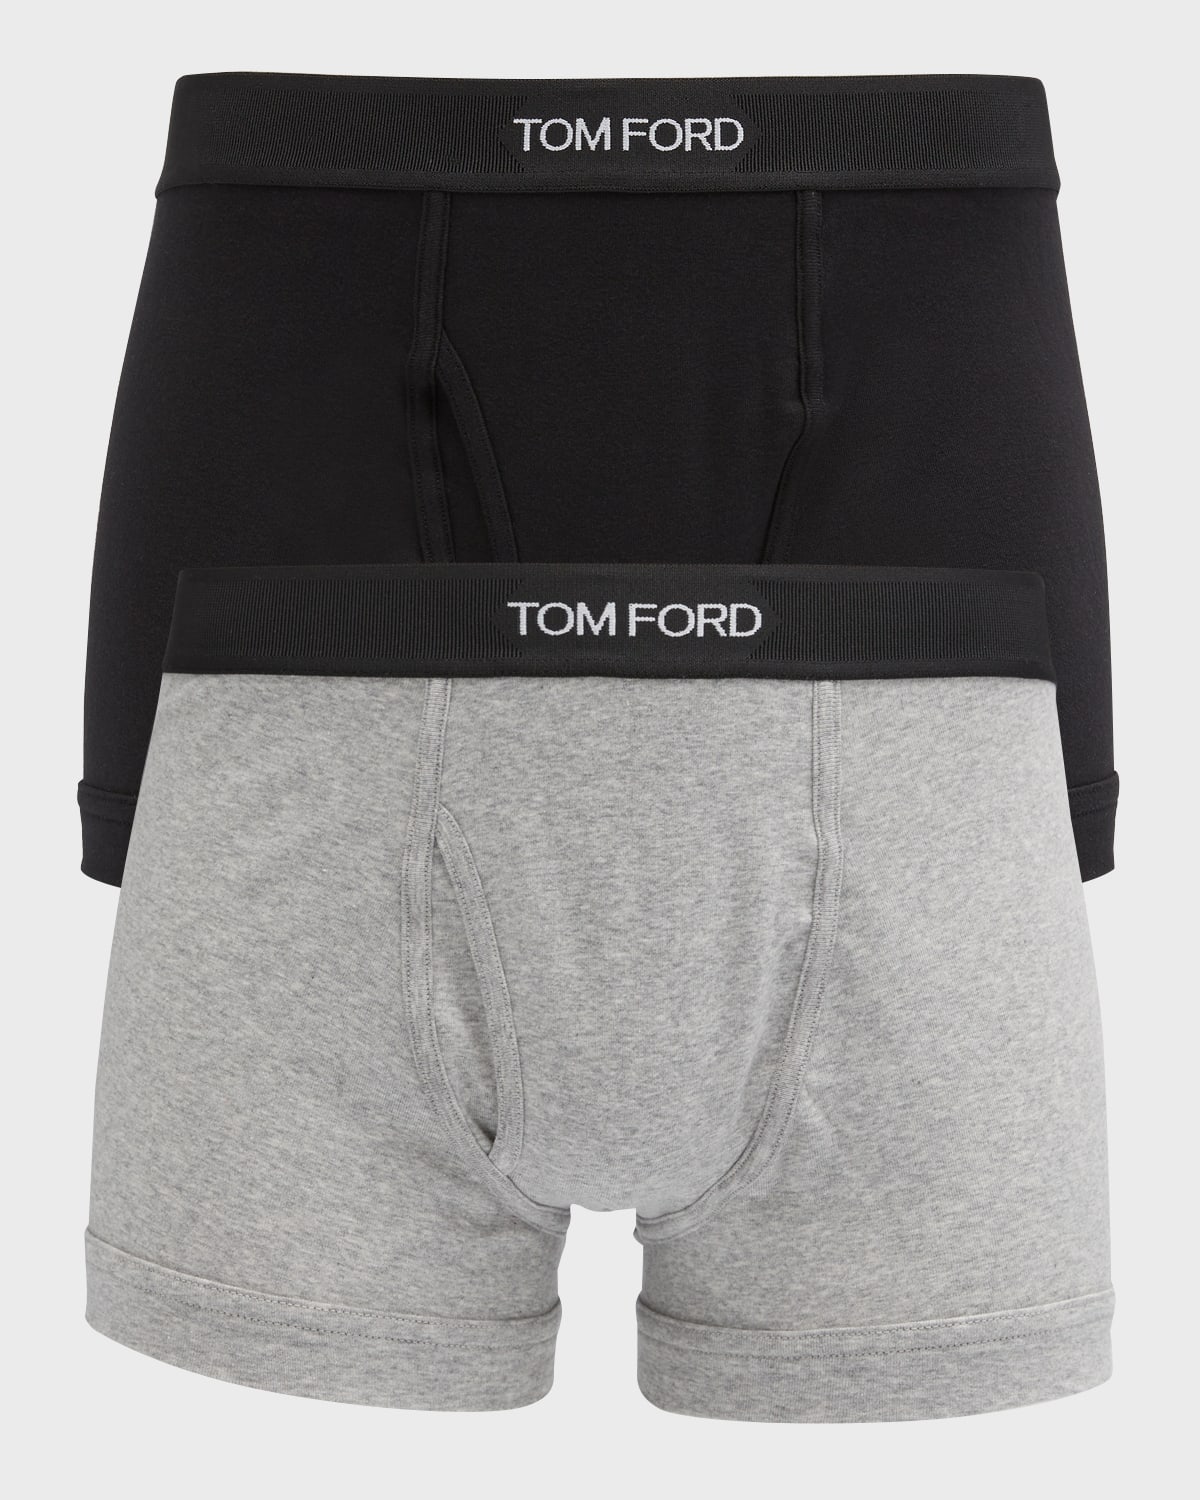 Tom Ford Men's 2-pack Solid Jersey Boxer Briefs In Black/grey